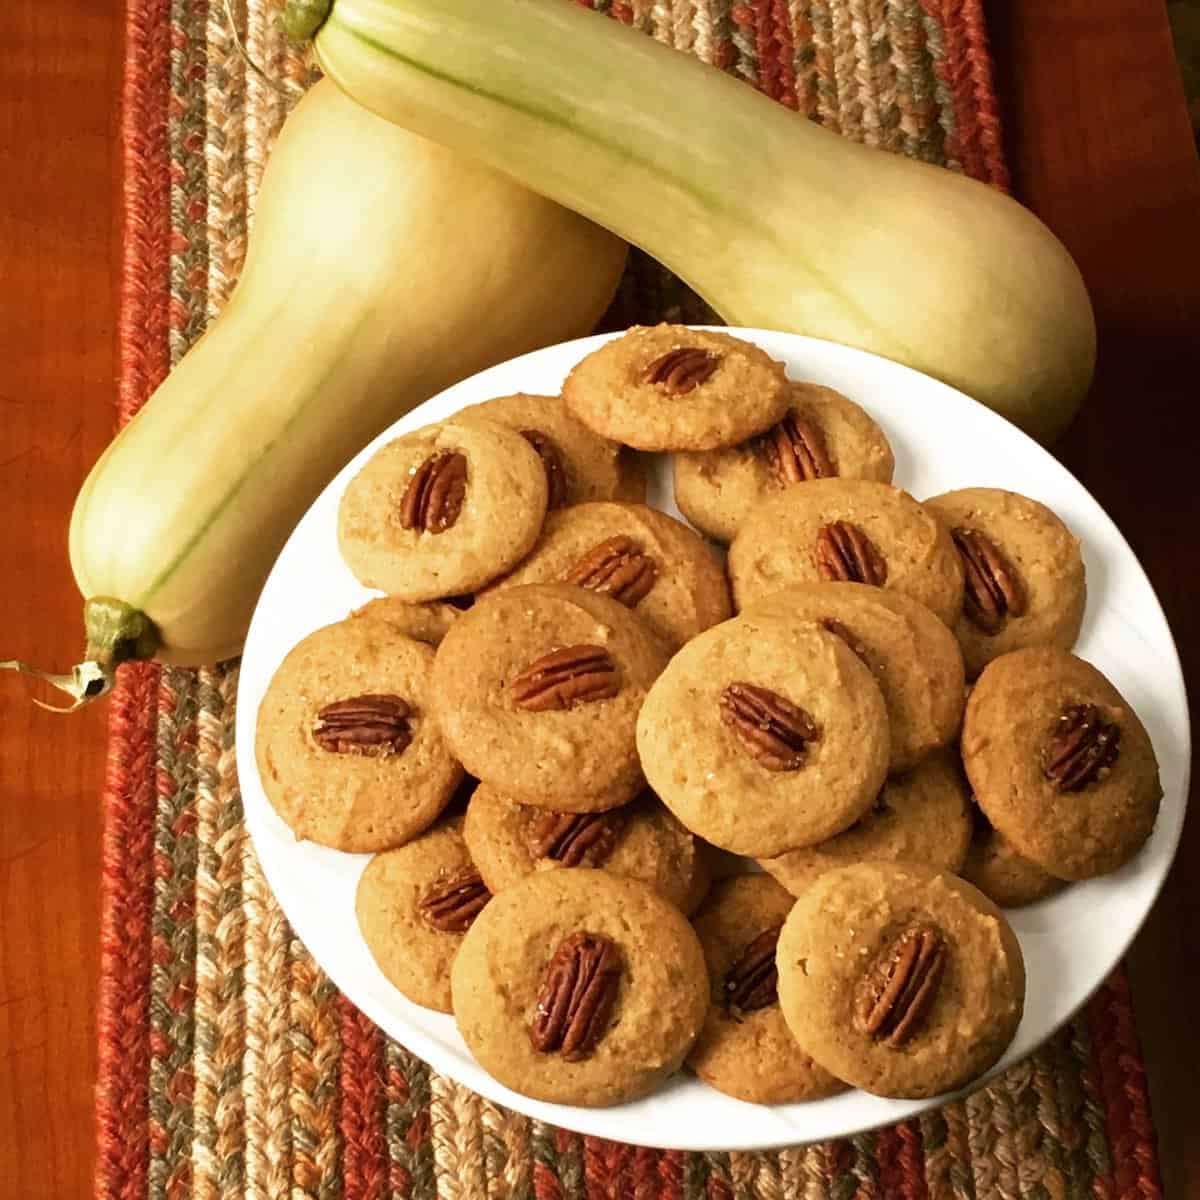 Plate of pecan cookies with fresh picked butternut squash.